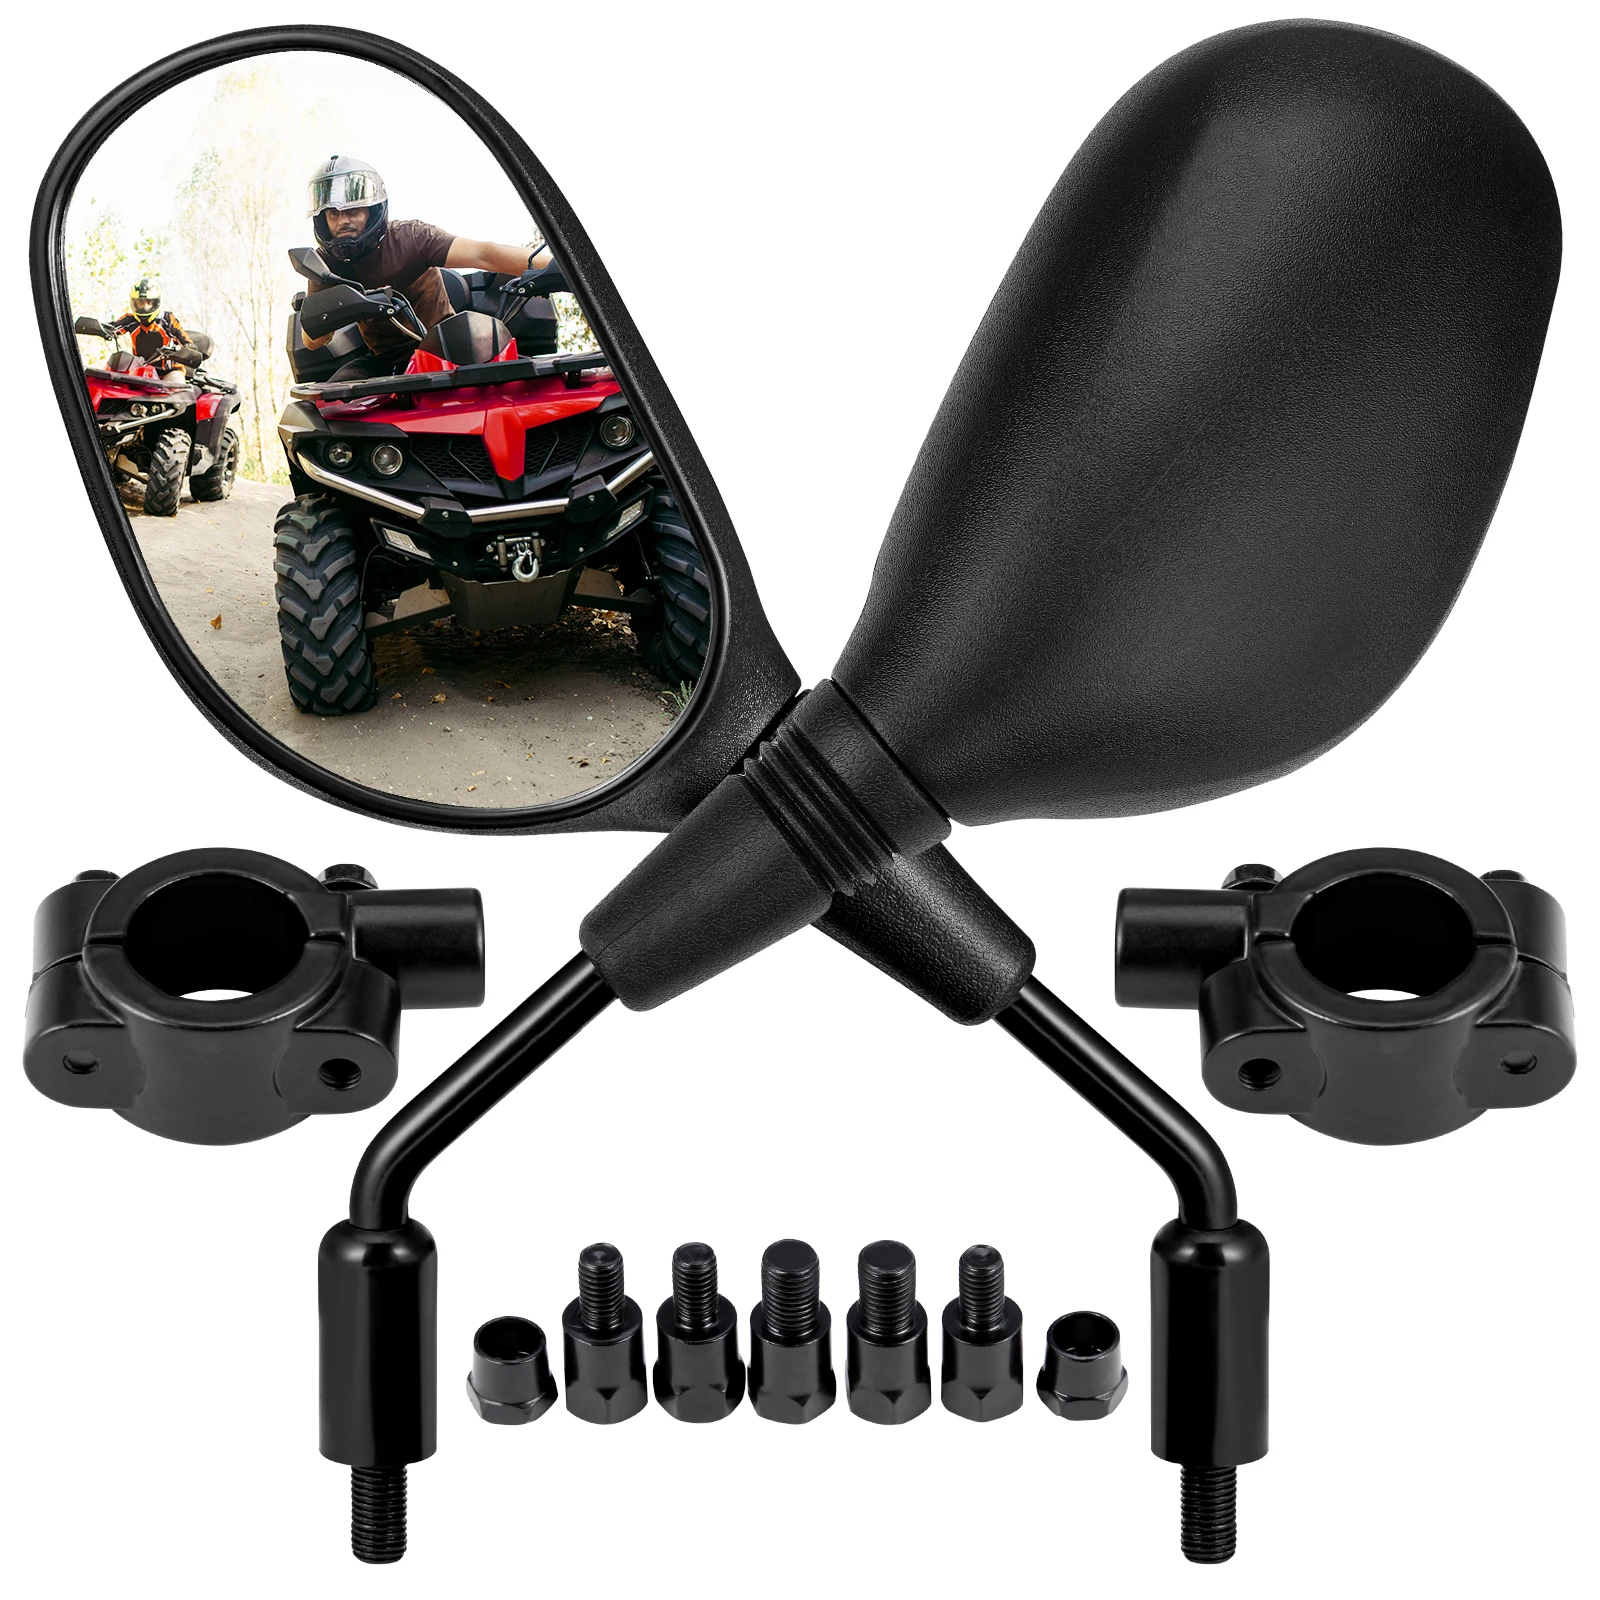 

7/8”Handlebar Mounts Rear View Mirrors Compatible with Polaris Sportsman 400 500 850 for Can-Am DS250 for Yamaha FZ-8